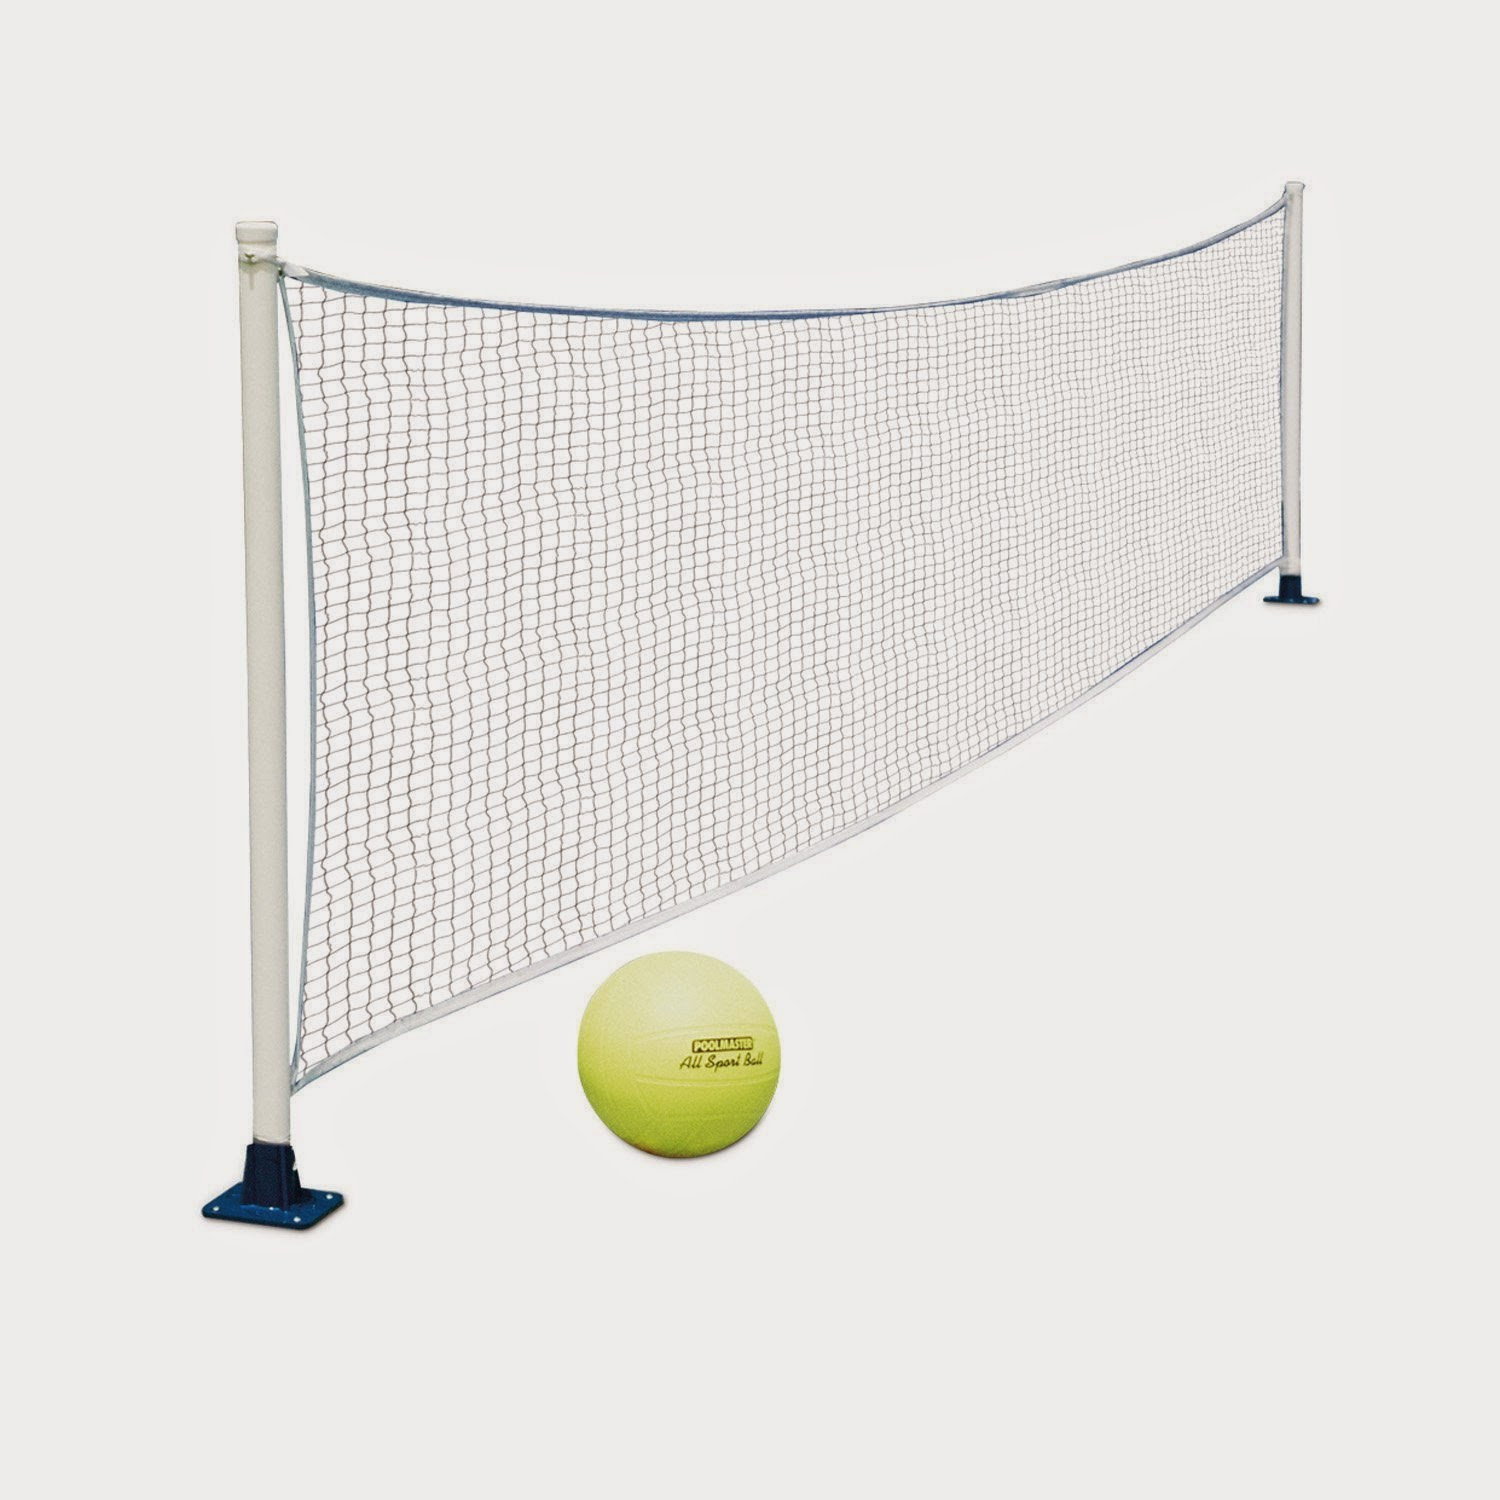 Above Ground Pool Volleyball Nets
 pool volleyball net volleyball net for above ground pool